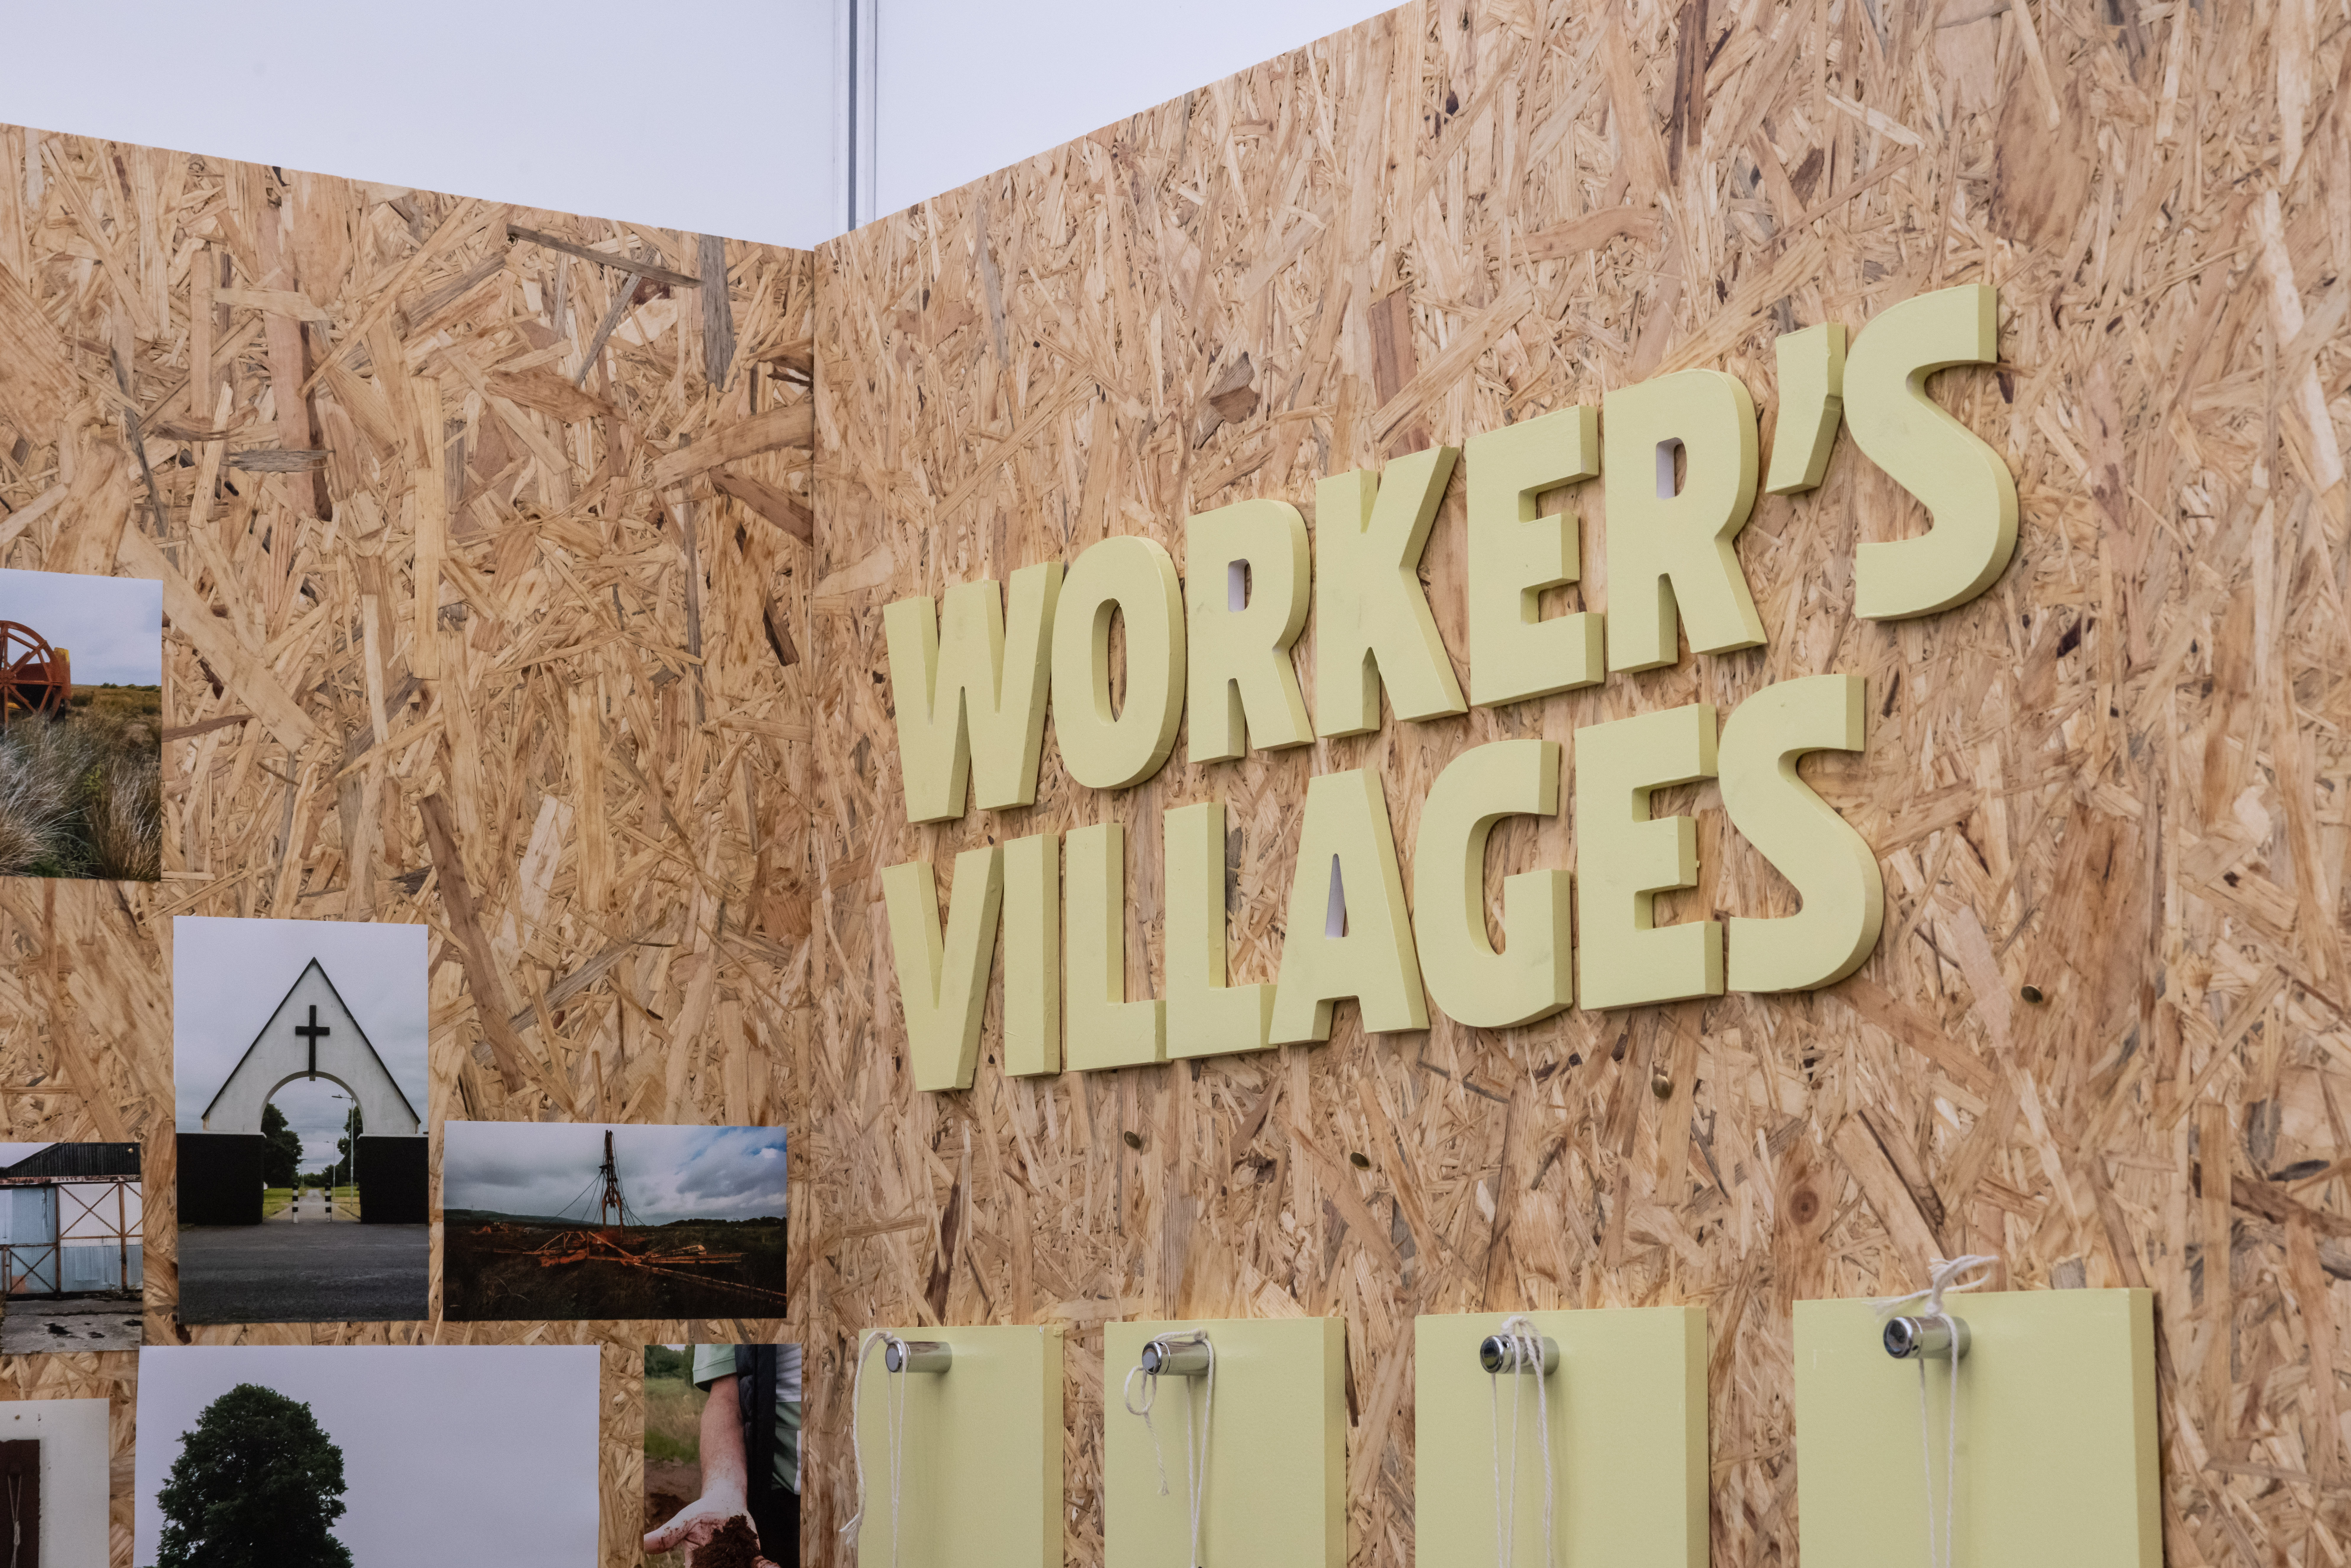 Close up of Workers' Villages exhibit sign